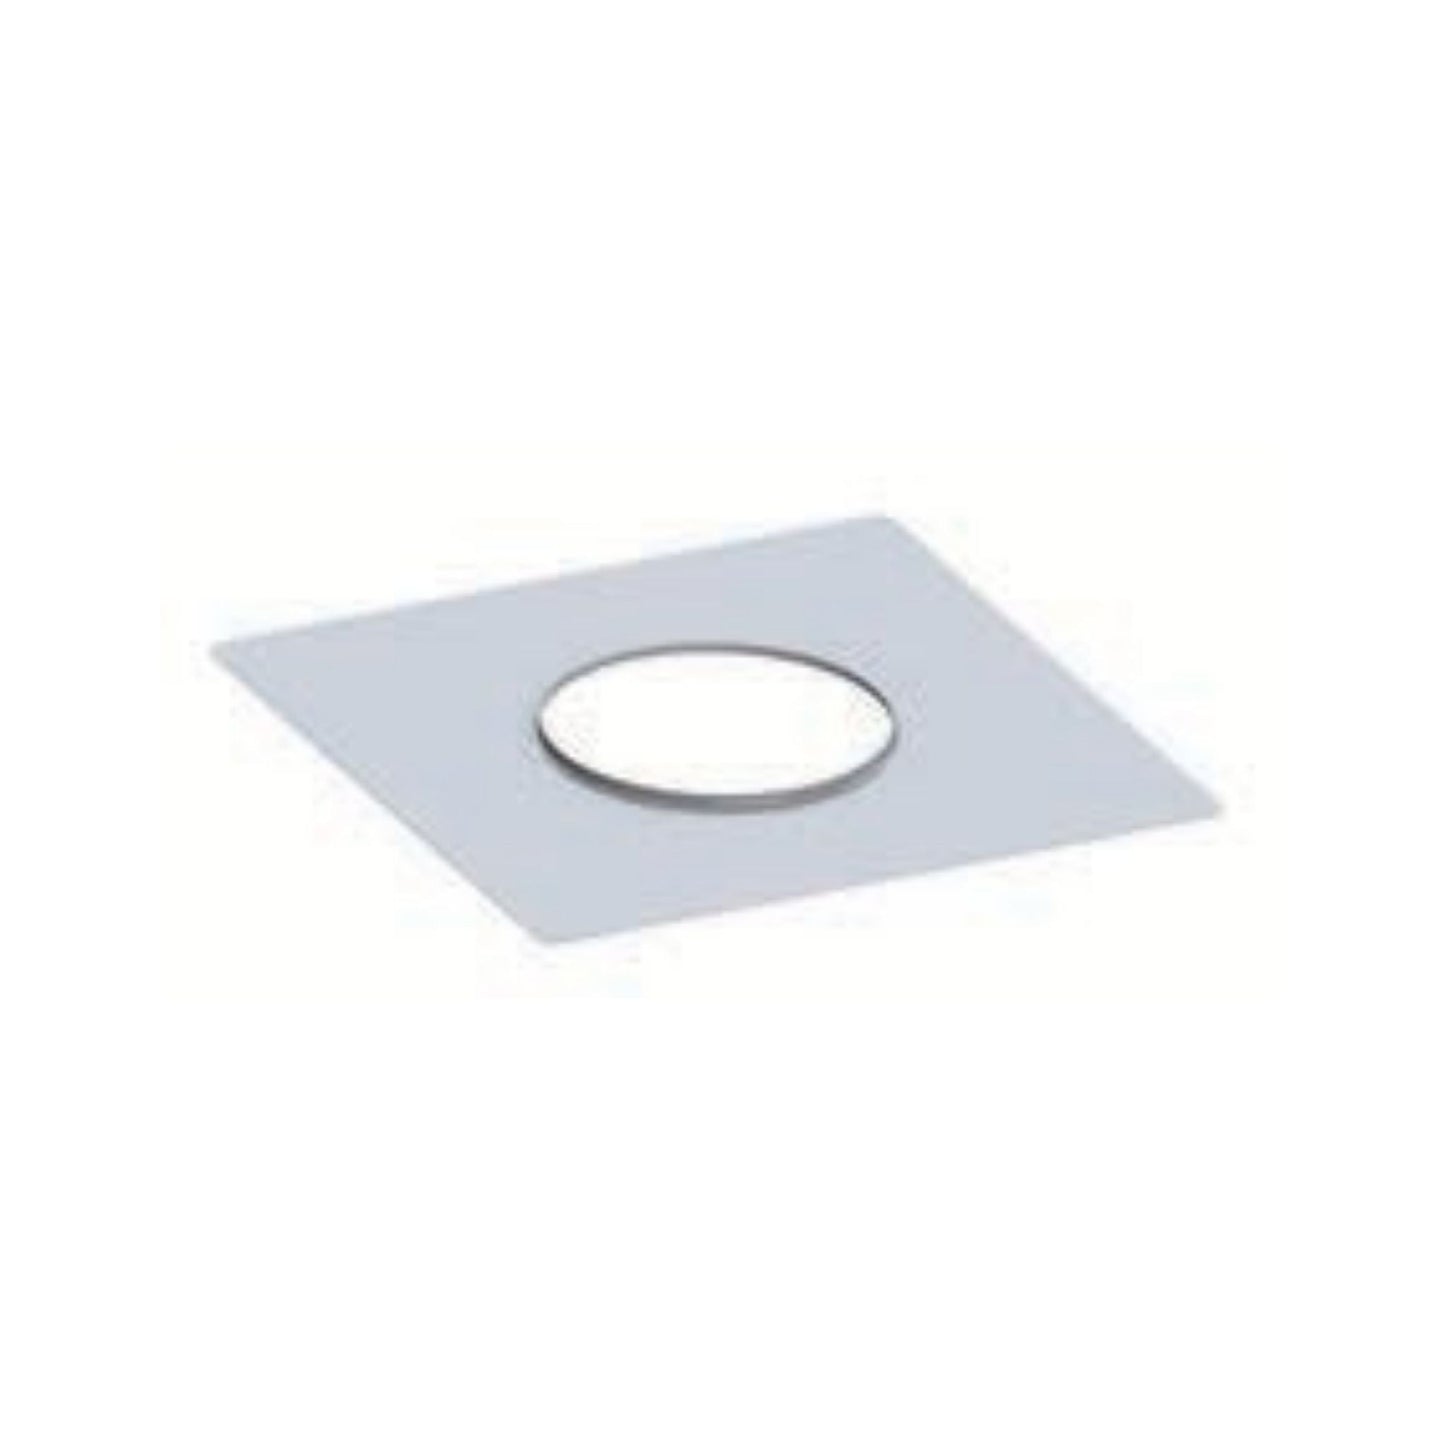 DuraVent FasNSeal Flex 12" Stainless Steel Top Cover Plate